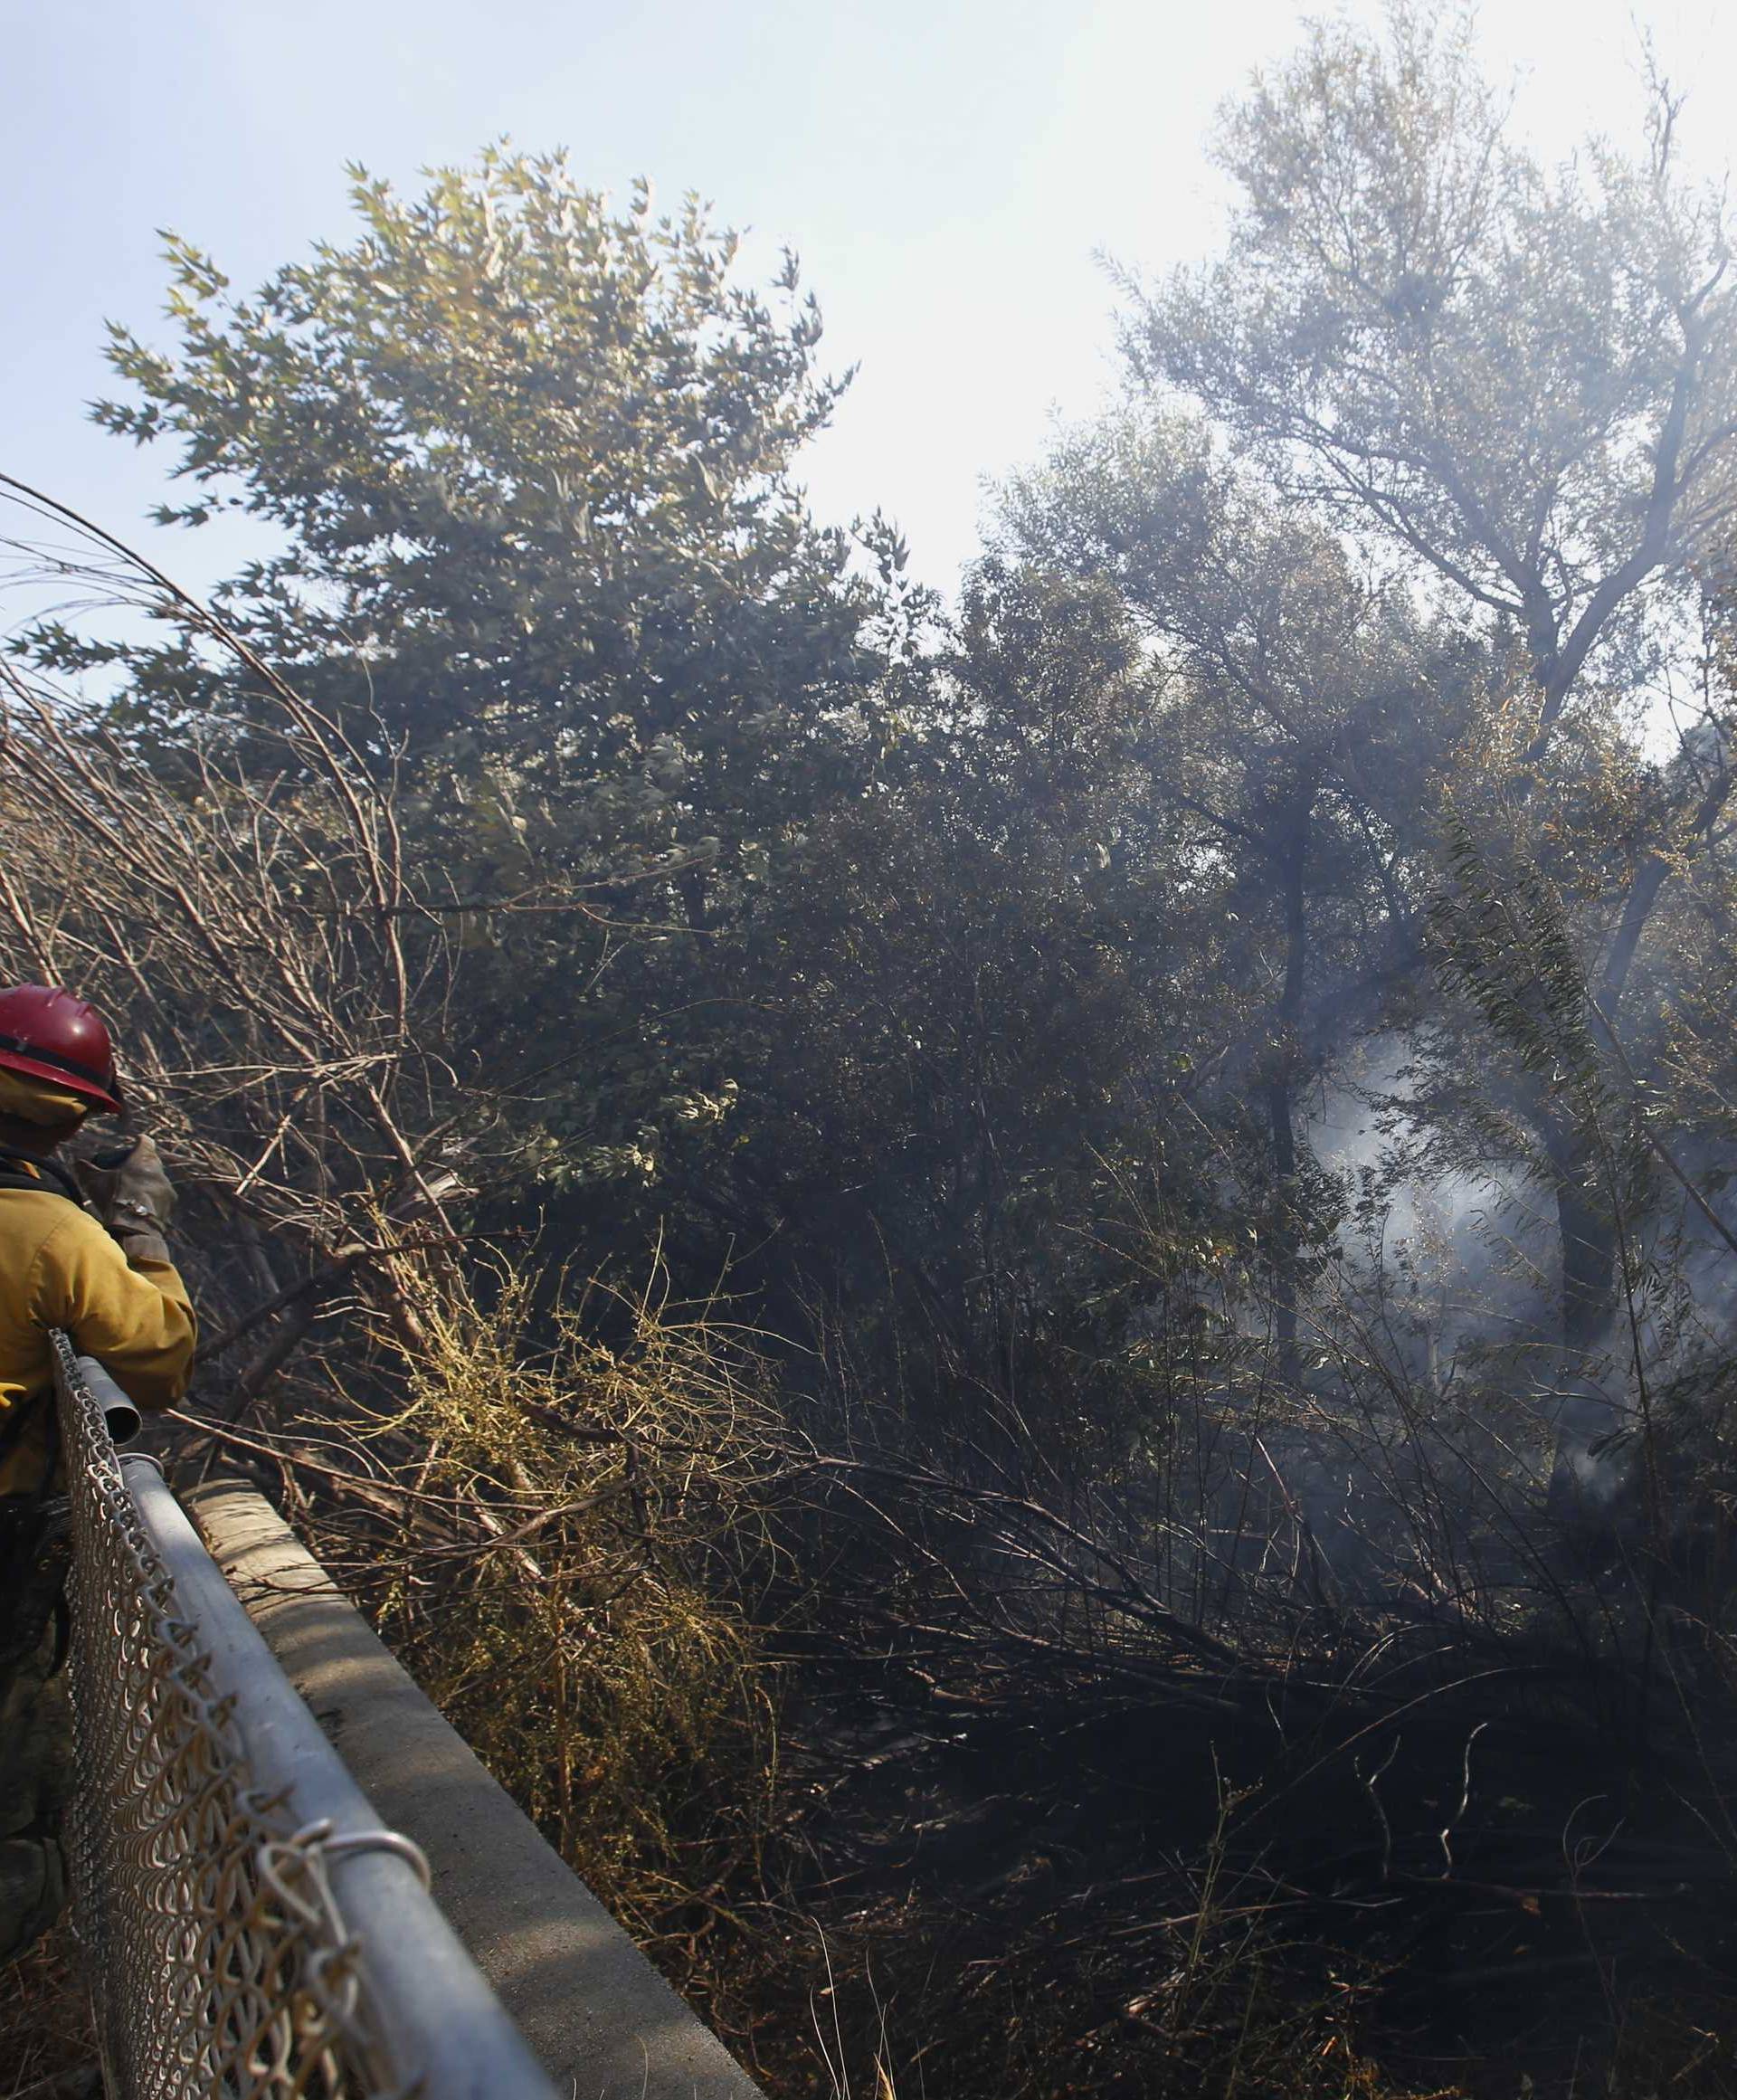 A fire captain surveys a site of the Woosley fire in West Hills, Southern California